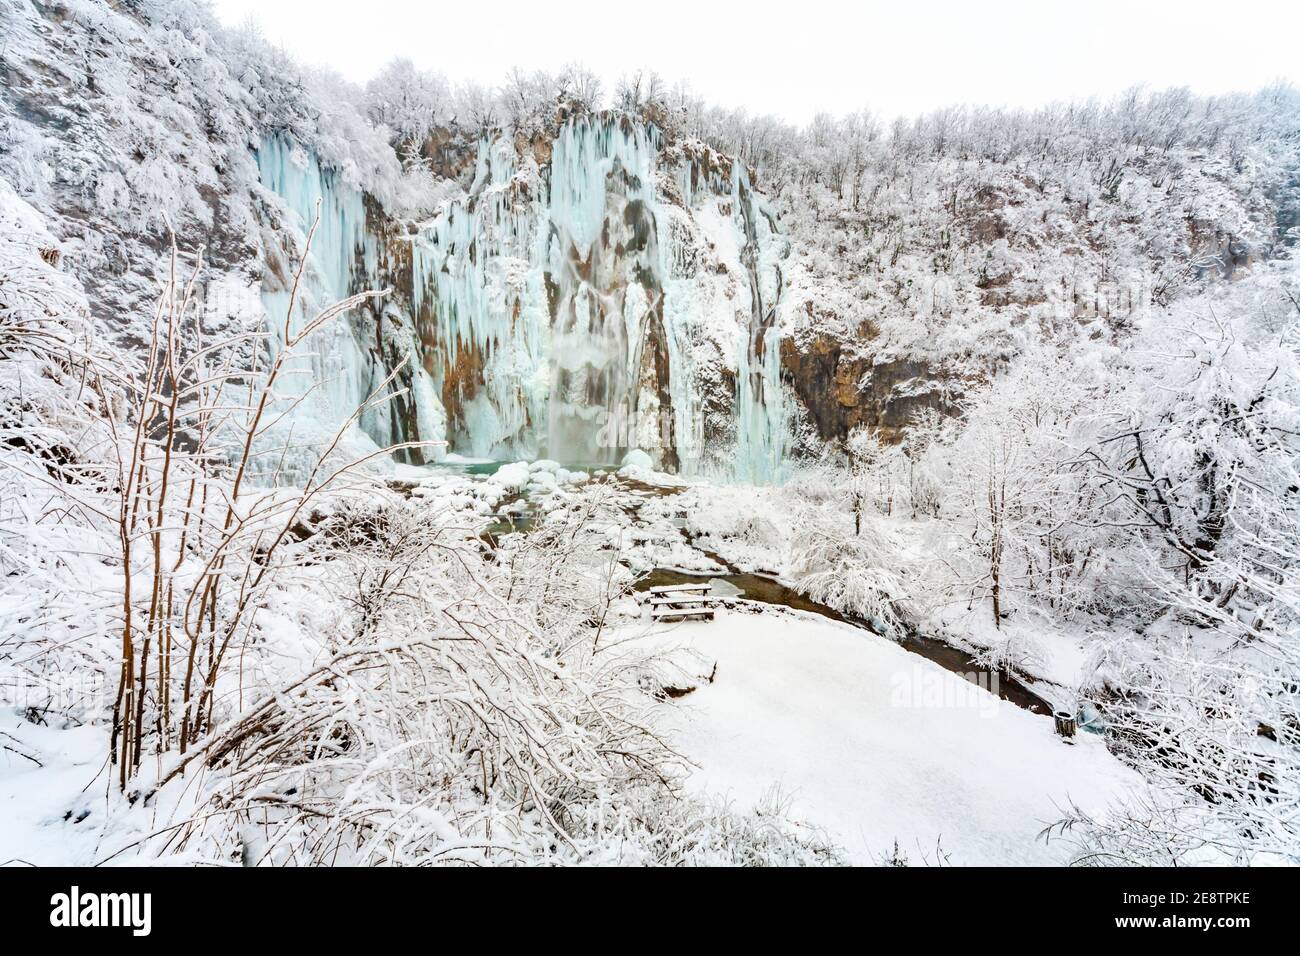 Frozen Veliki slap waterfall in national park Plitvice lakes in Croatia Europe in Winter under covered cover snow and ice Stock Photo